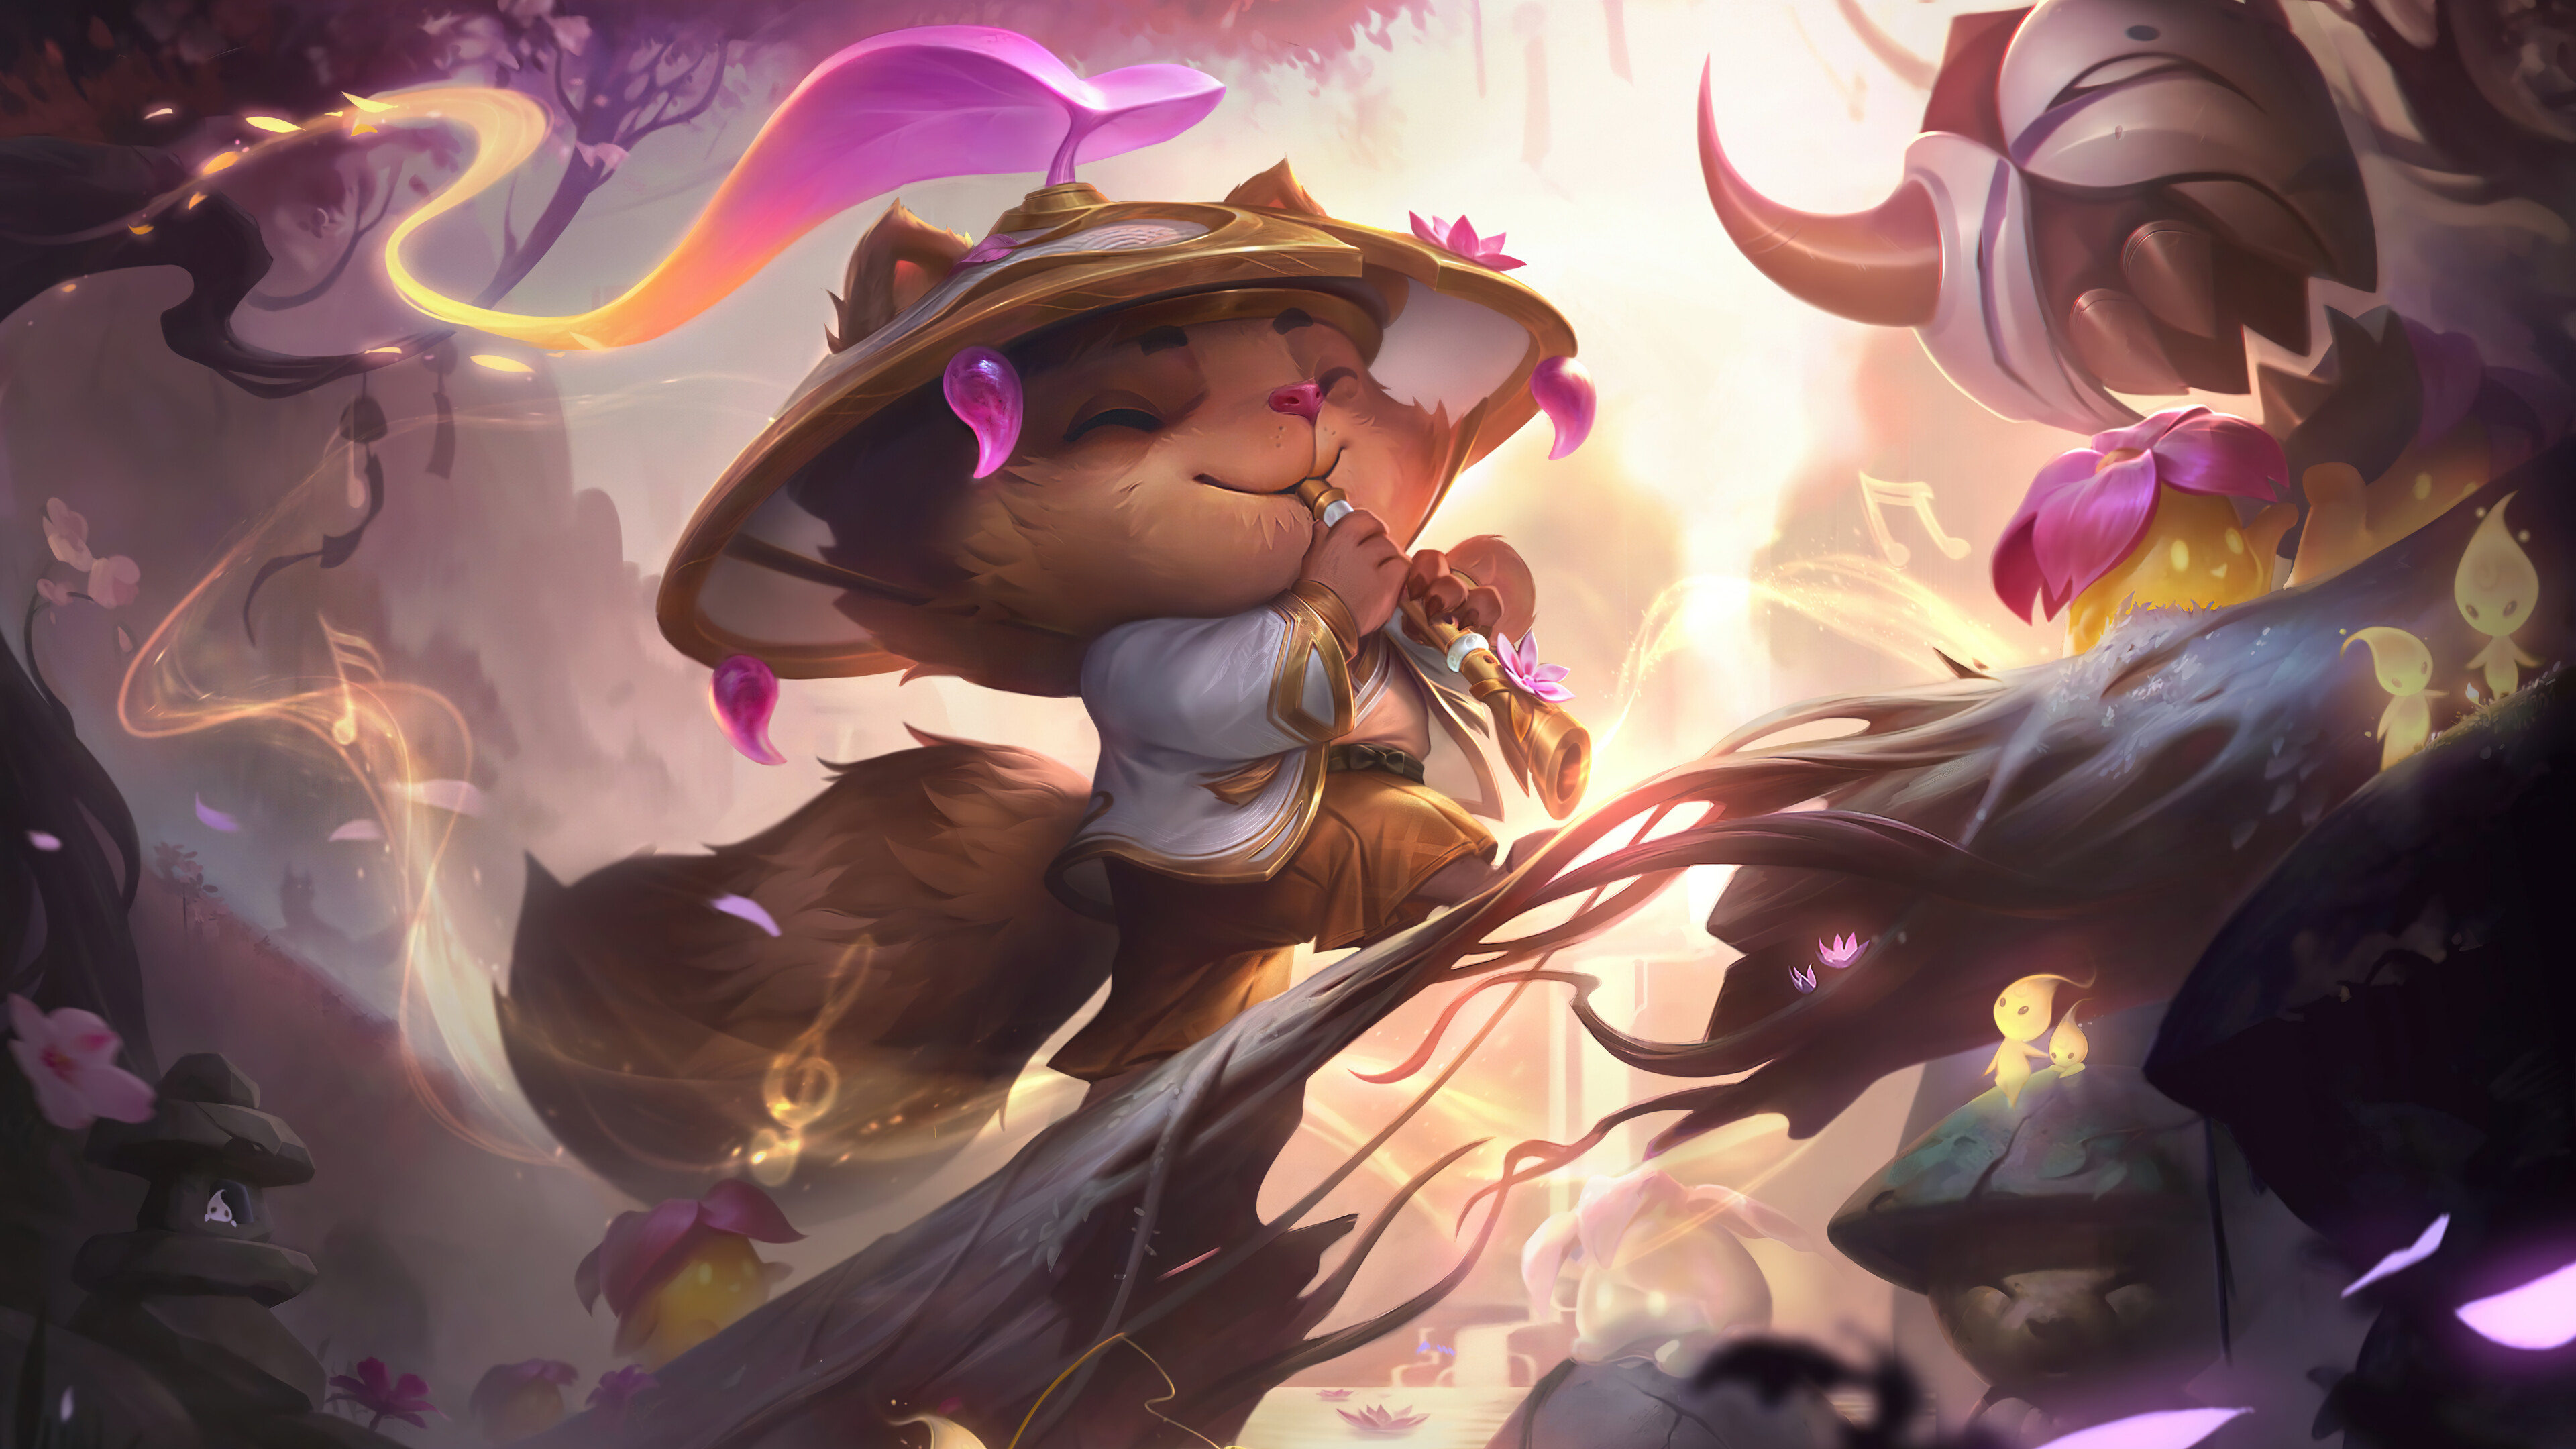 General 3840x2160 spirit blossom Teemo Teemo (League of Legends) League of Legends Riot Games GZG PC gaming Prestige Edition (League of Legends) Spirit Blossom(League of Legends)